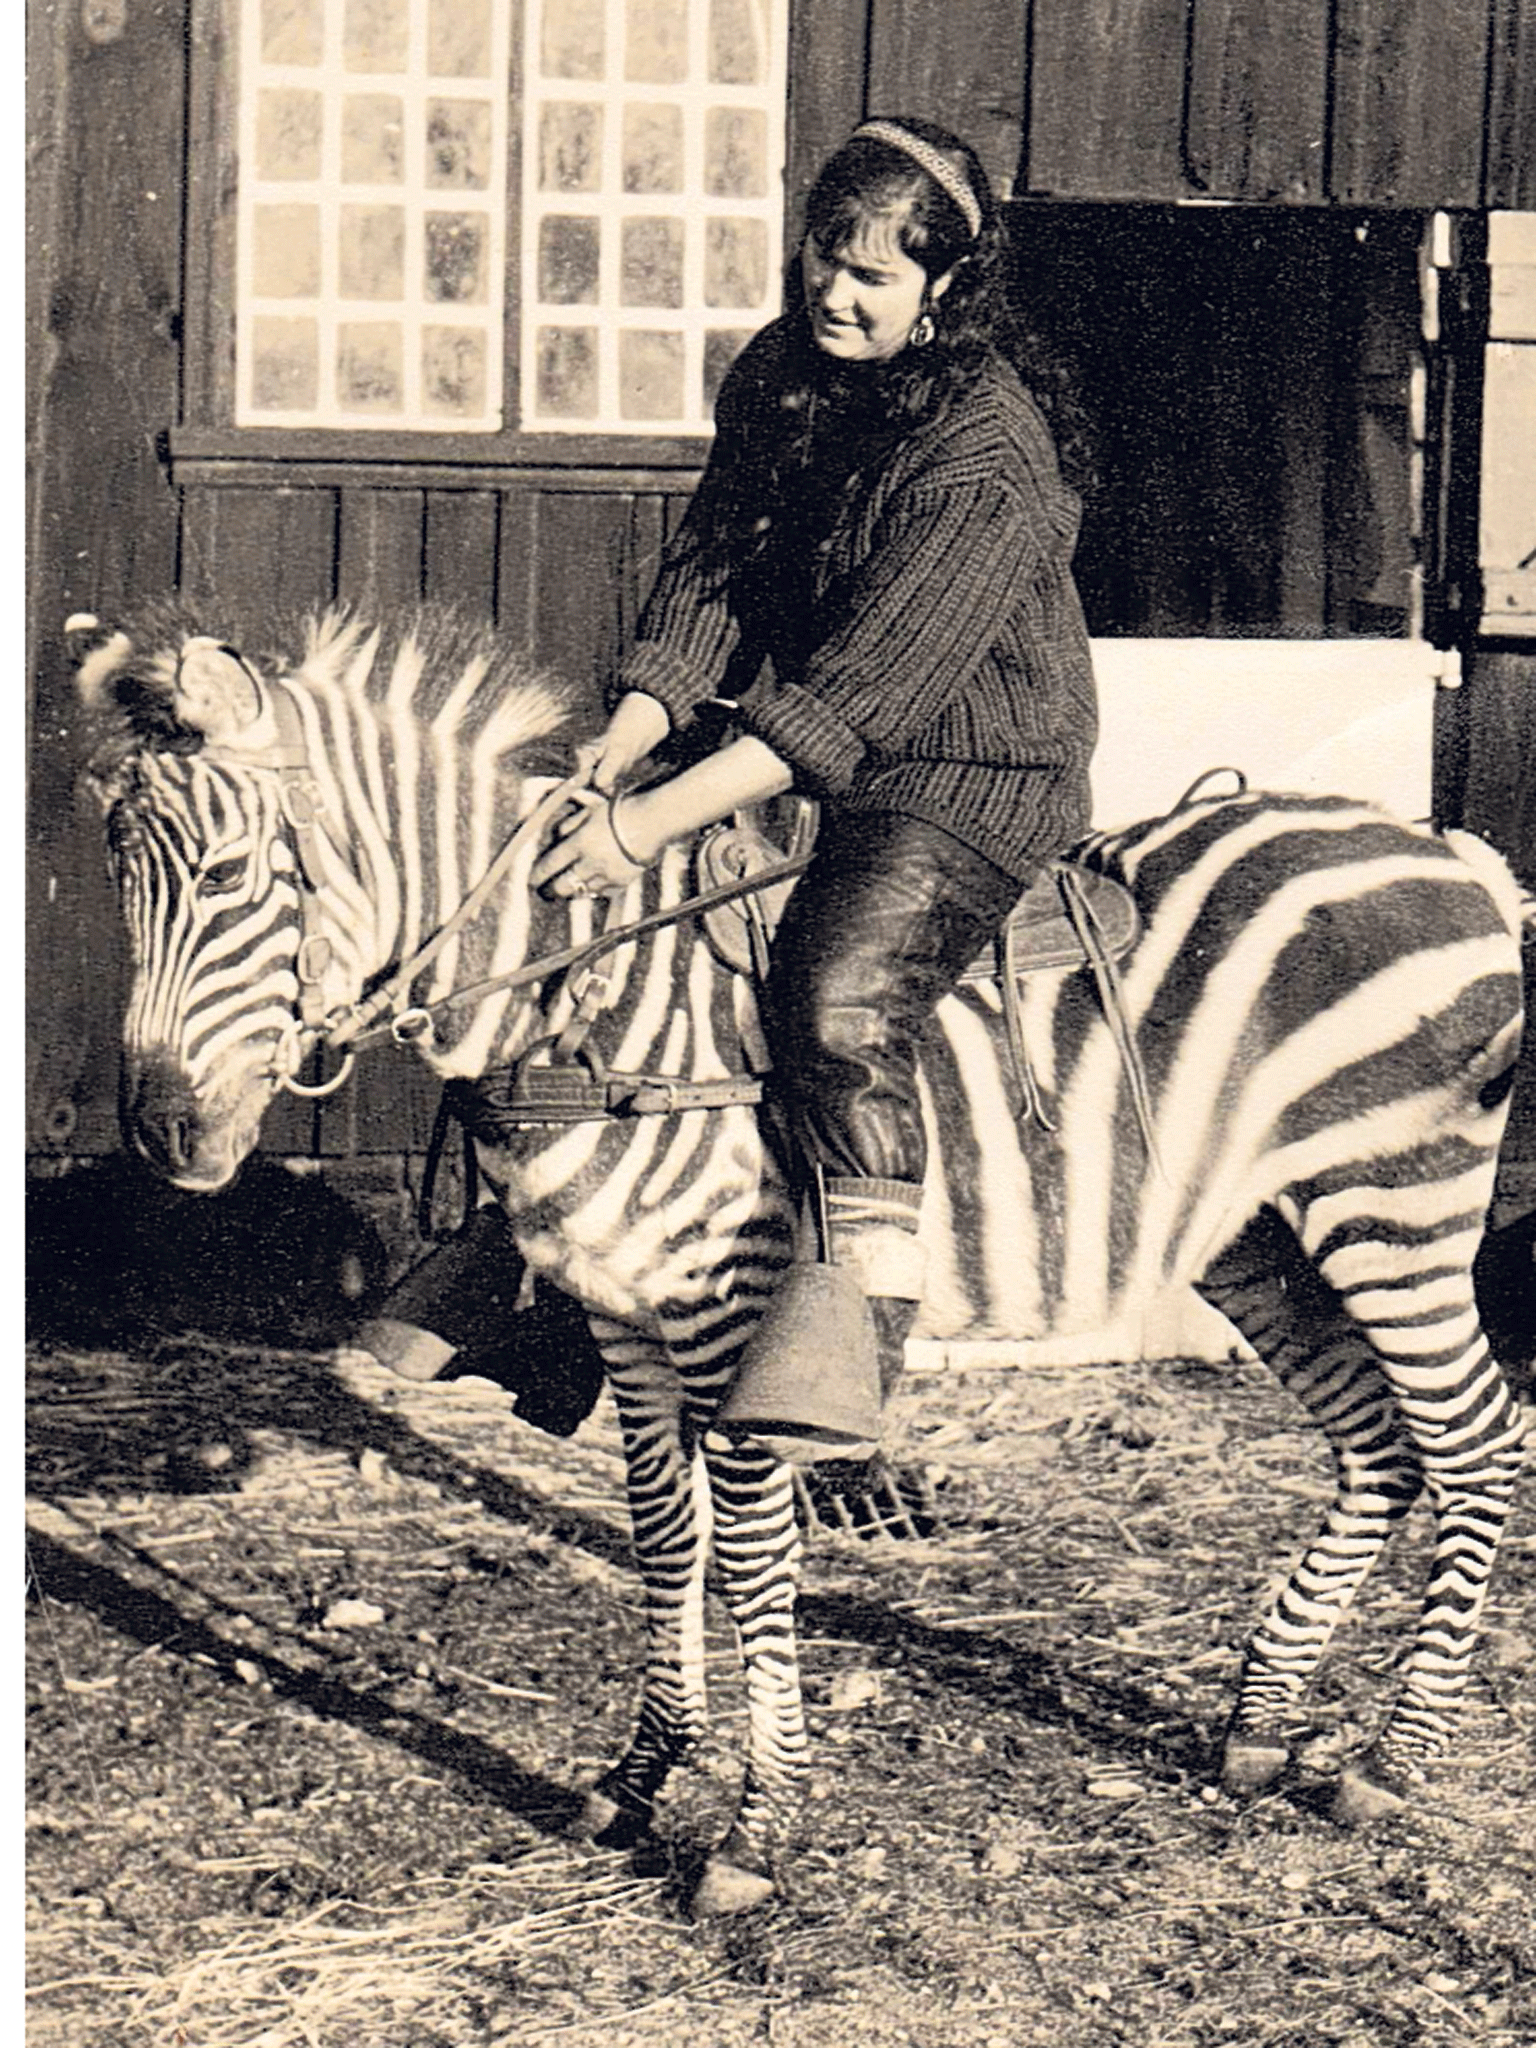 Casey astride Stripely, the zebra she attempted to mate with a horse